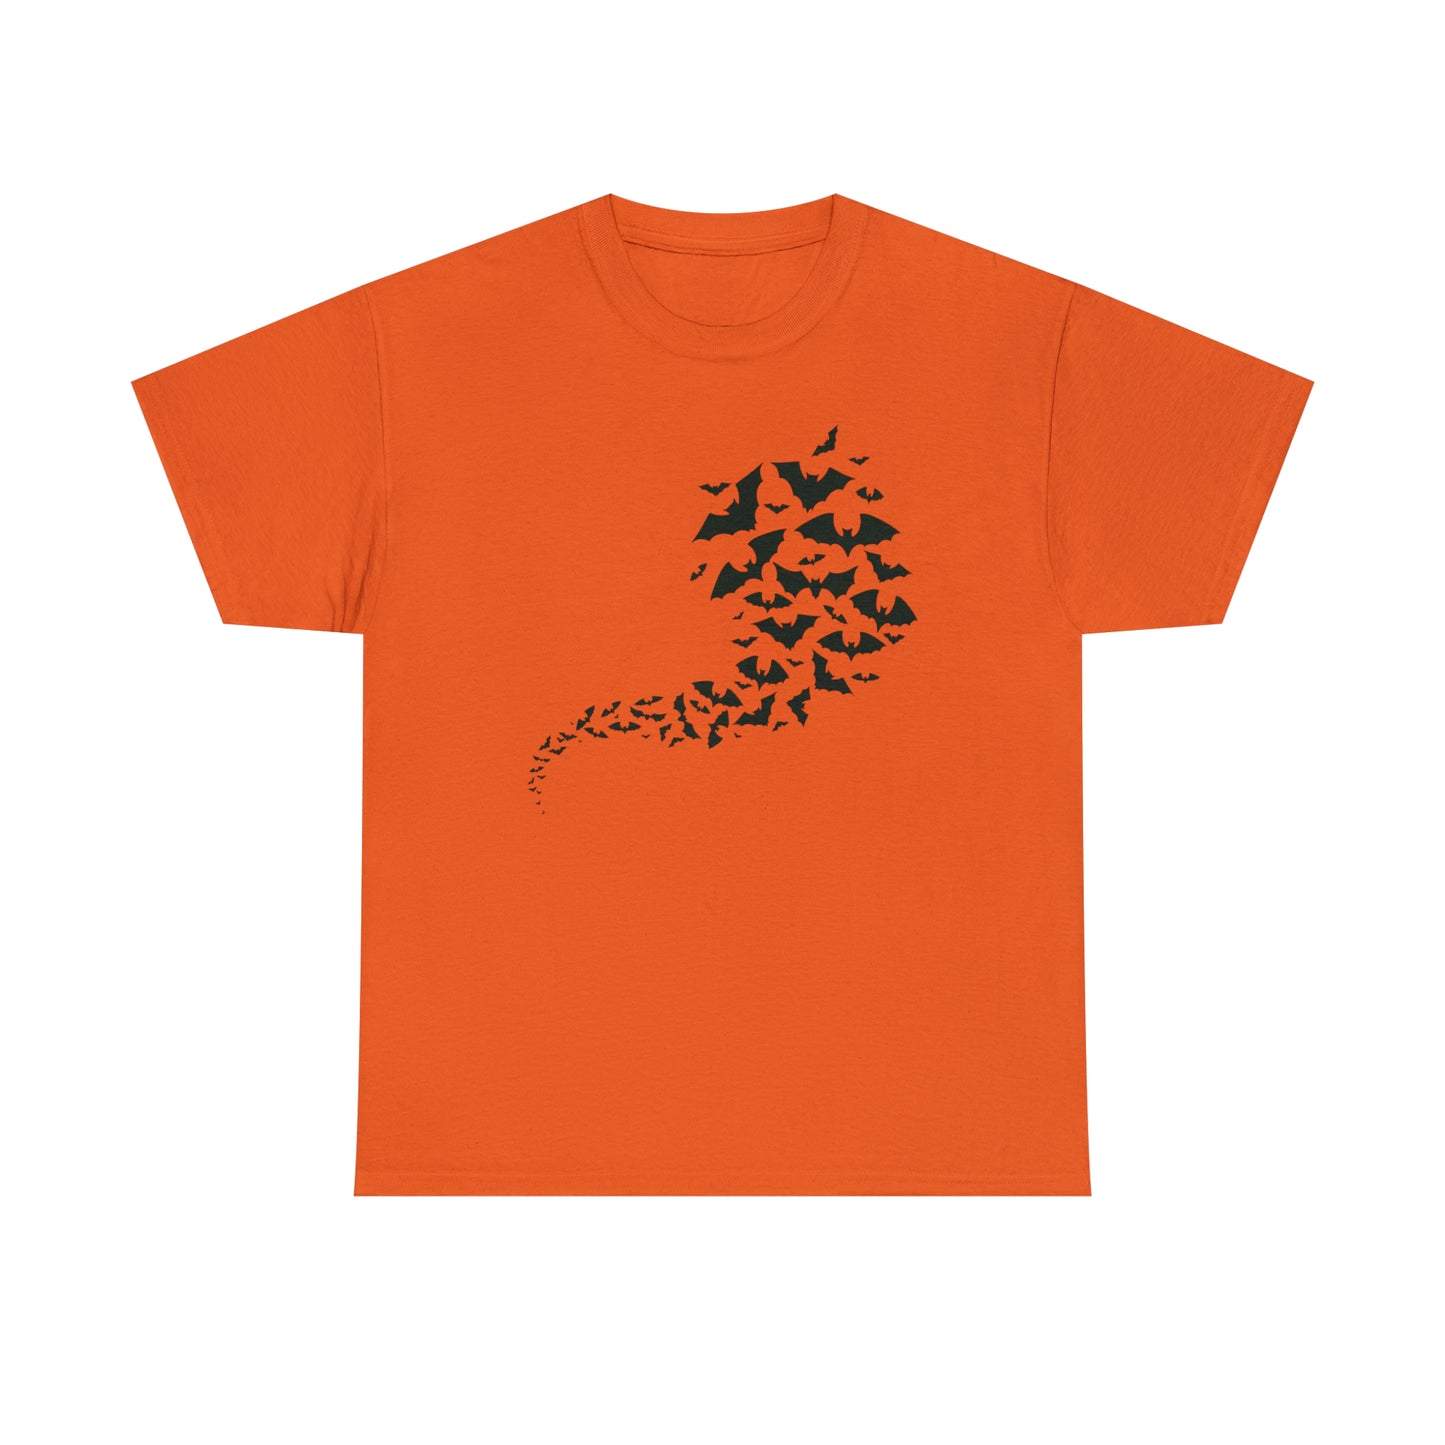 Halloween T-Shirt With Flying Bats T Shirt For Spooky Costume TShirt